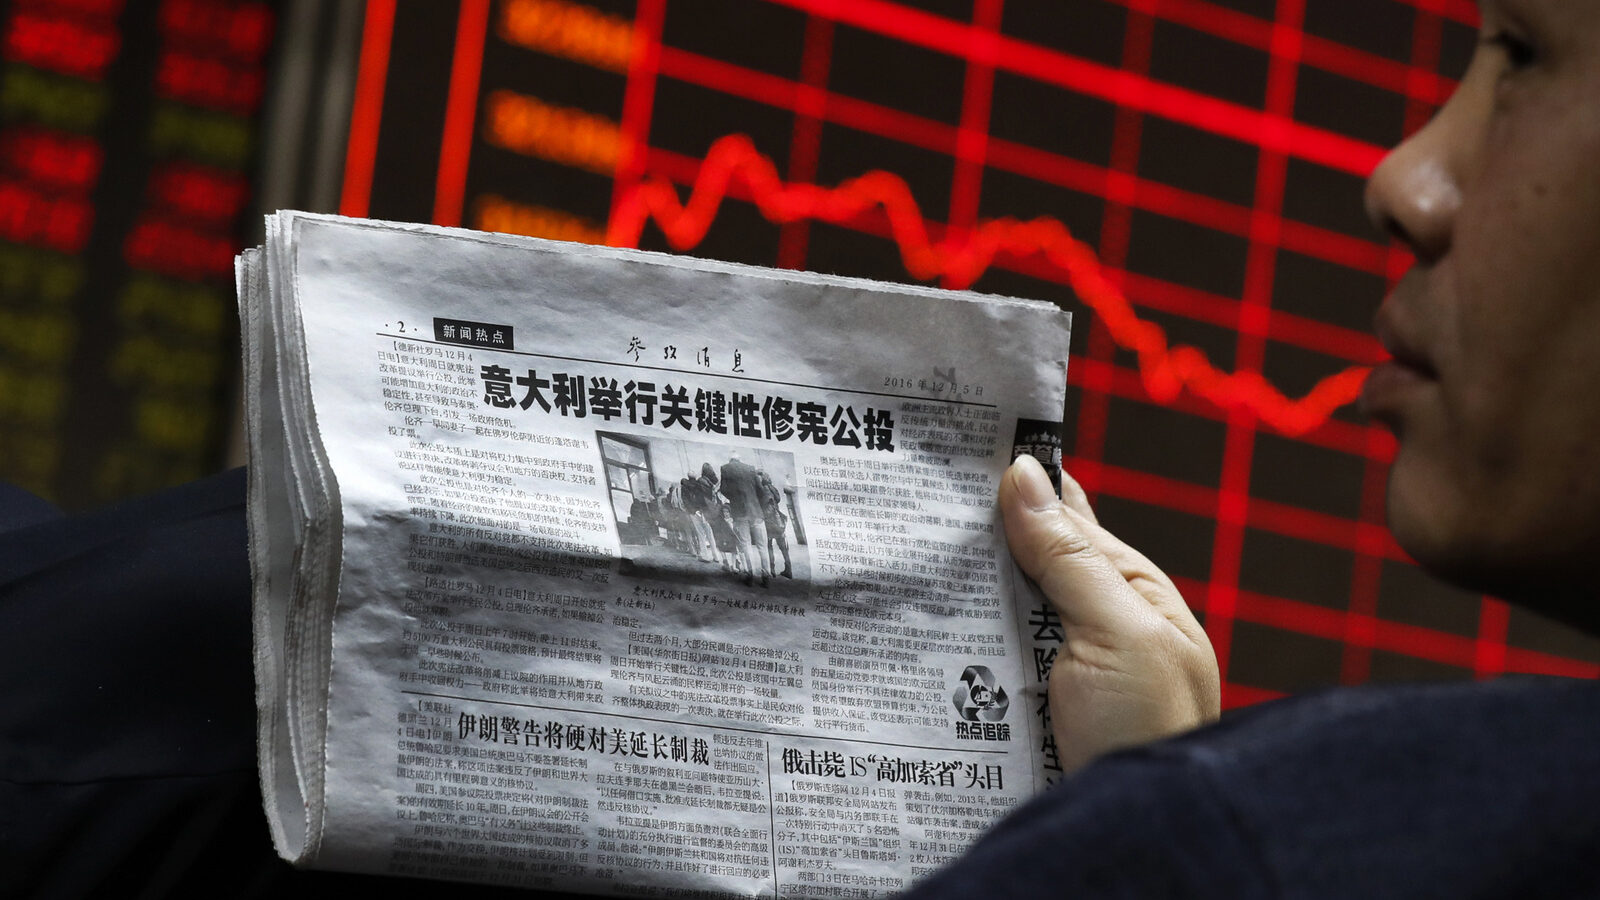 A man holds a newspaper as he looks at an electronic board displaying stock prices at a brokerage house in Beijing, Monday, Dec. 5, 2016. (AP/Andy Wong)